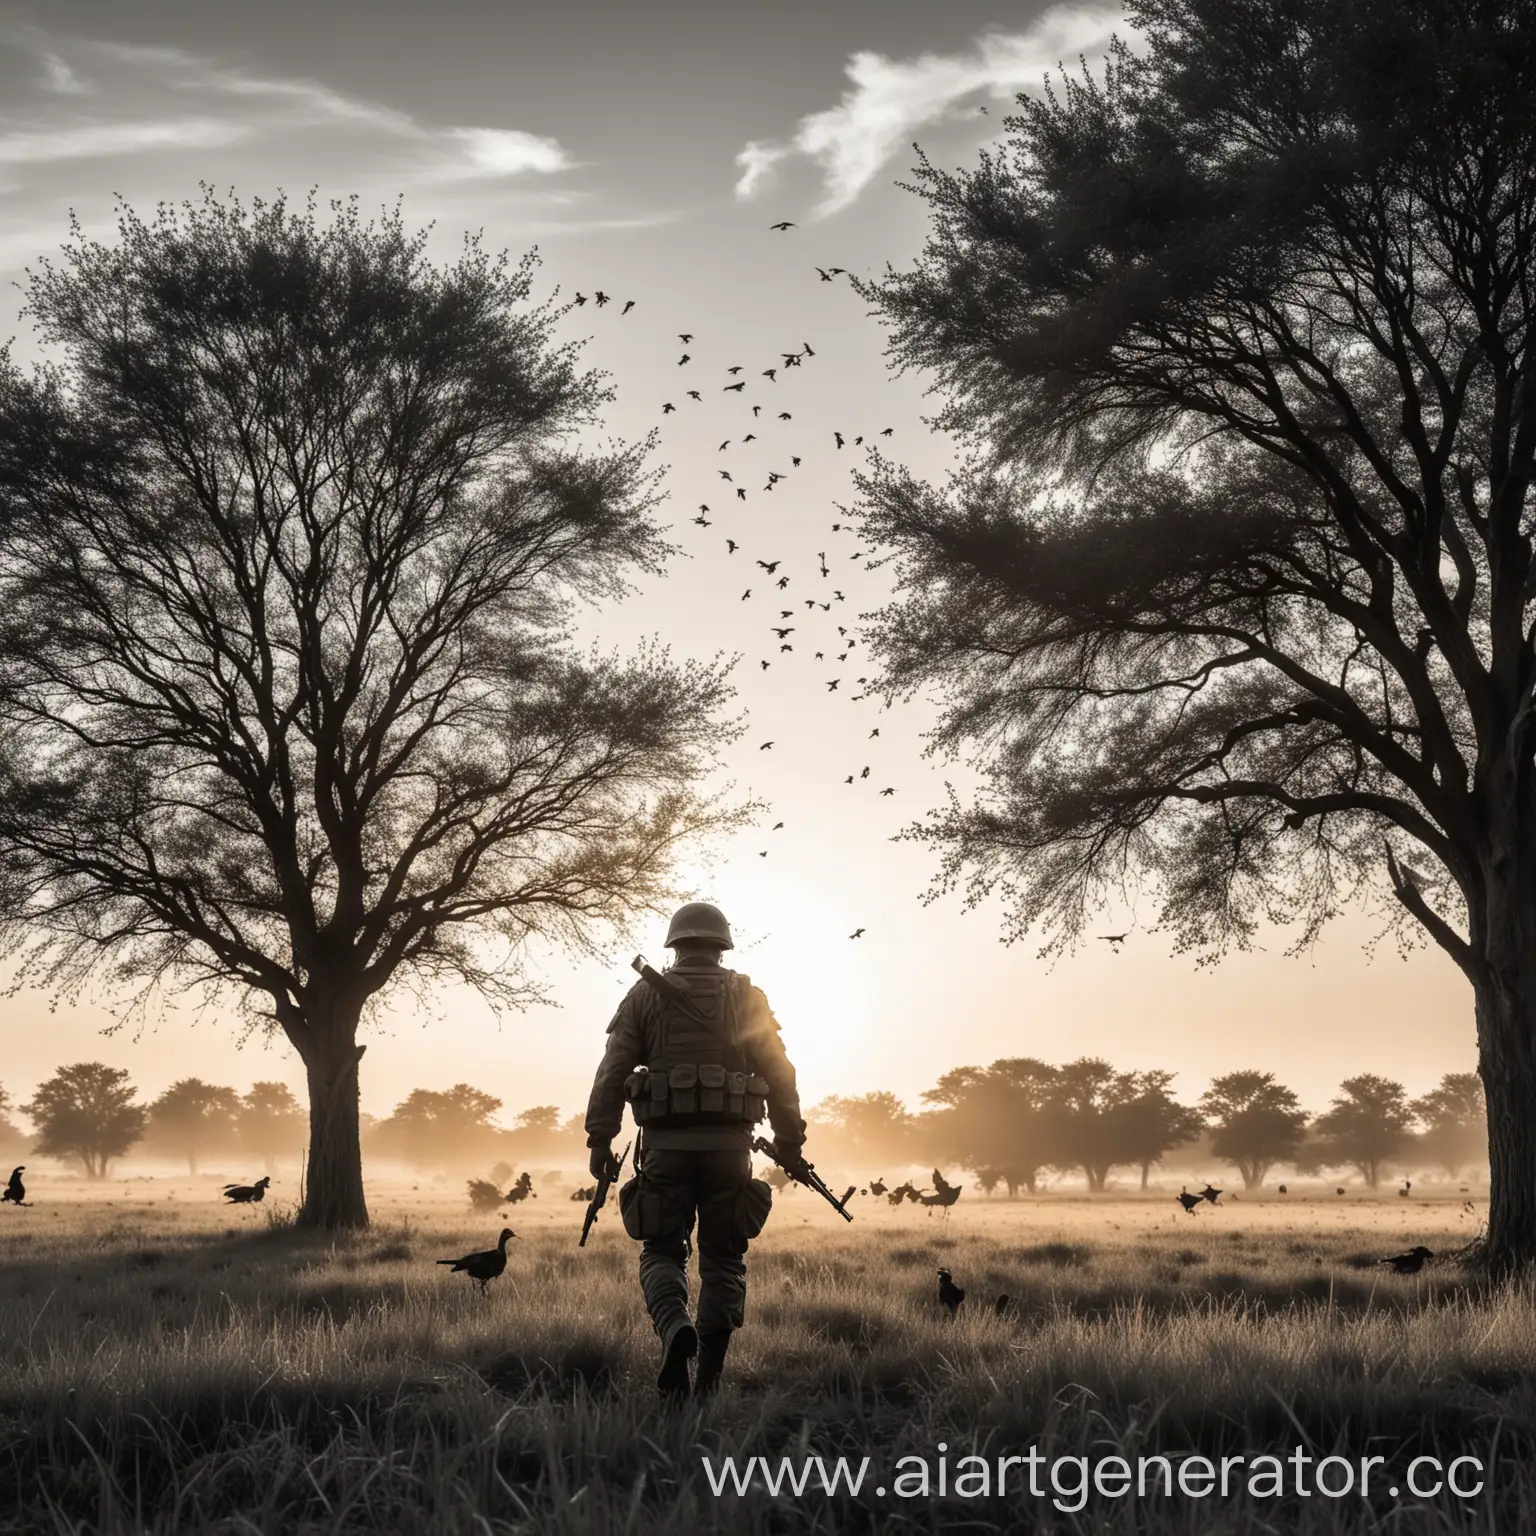 black and white vertical image,
in the foreground - a large modern soldier in a helmet with an AK-47 machine gun, from the back,
in a field, walking into the sunset,
there is a large tree nearby,
a flock of birds in the sky,
a fresh field with grass in the background, the wind